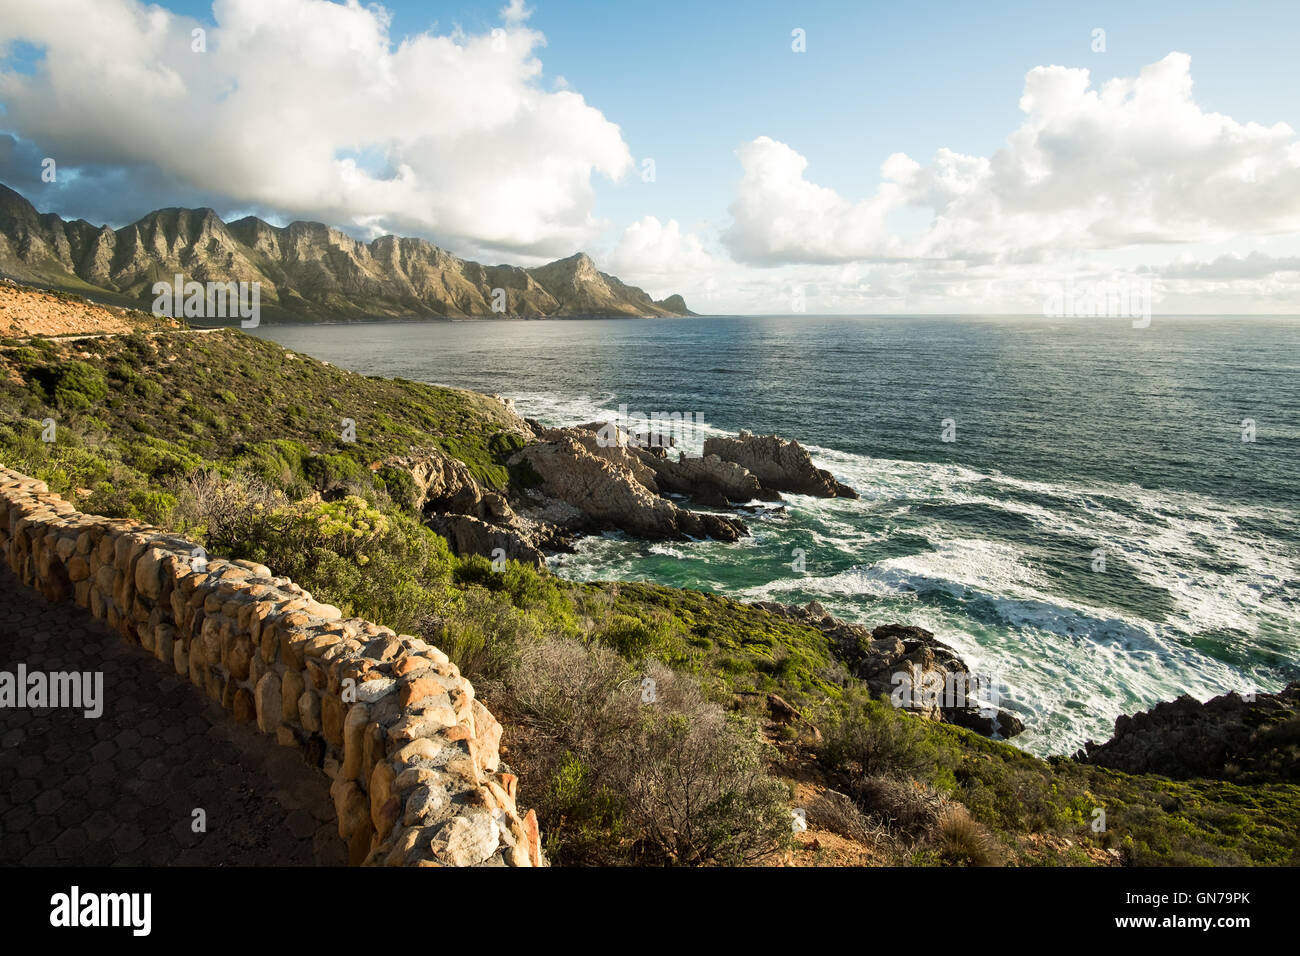 Cape Town, South Africa, Coastal Landscape with Mountains, Rocks, Sea and Road. Stock Photo